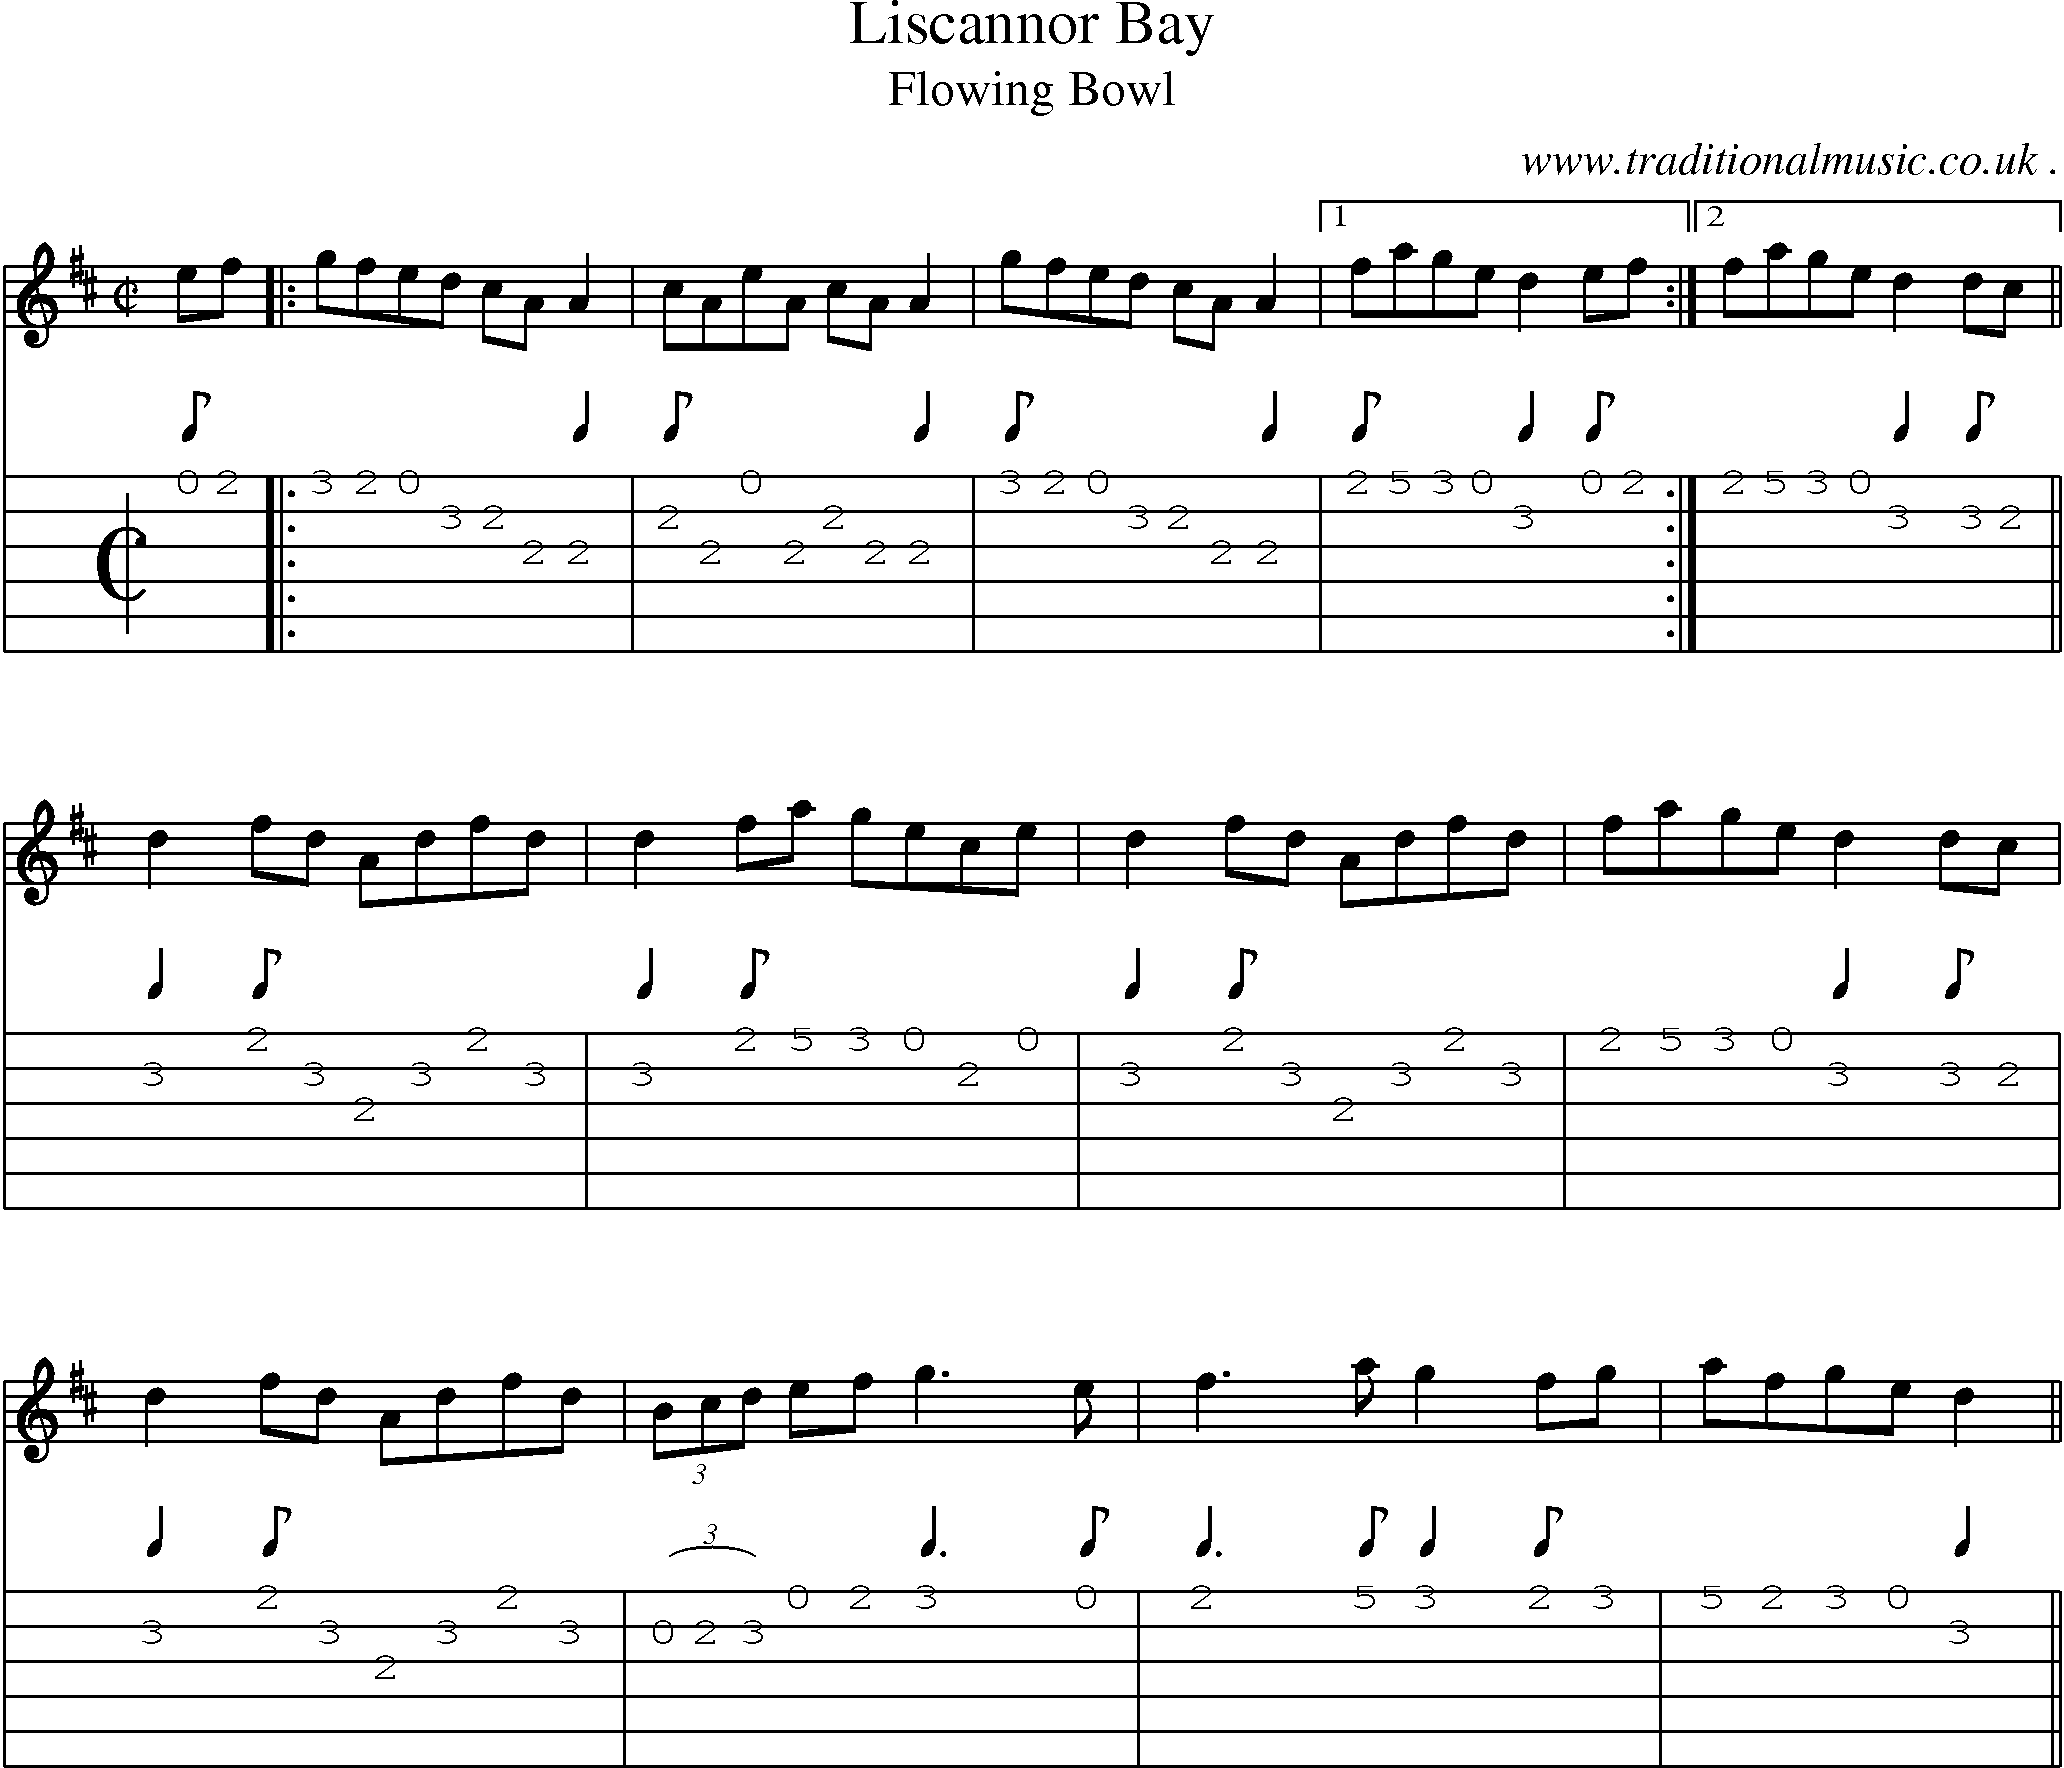 Sheet-Music and Guitar Tabs for Liscannor Bay